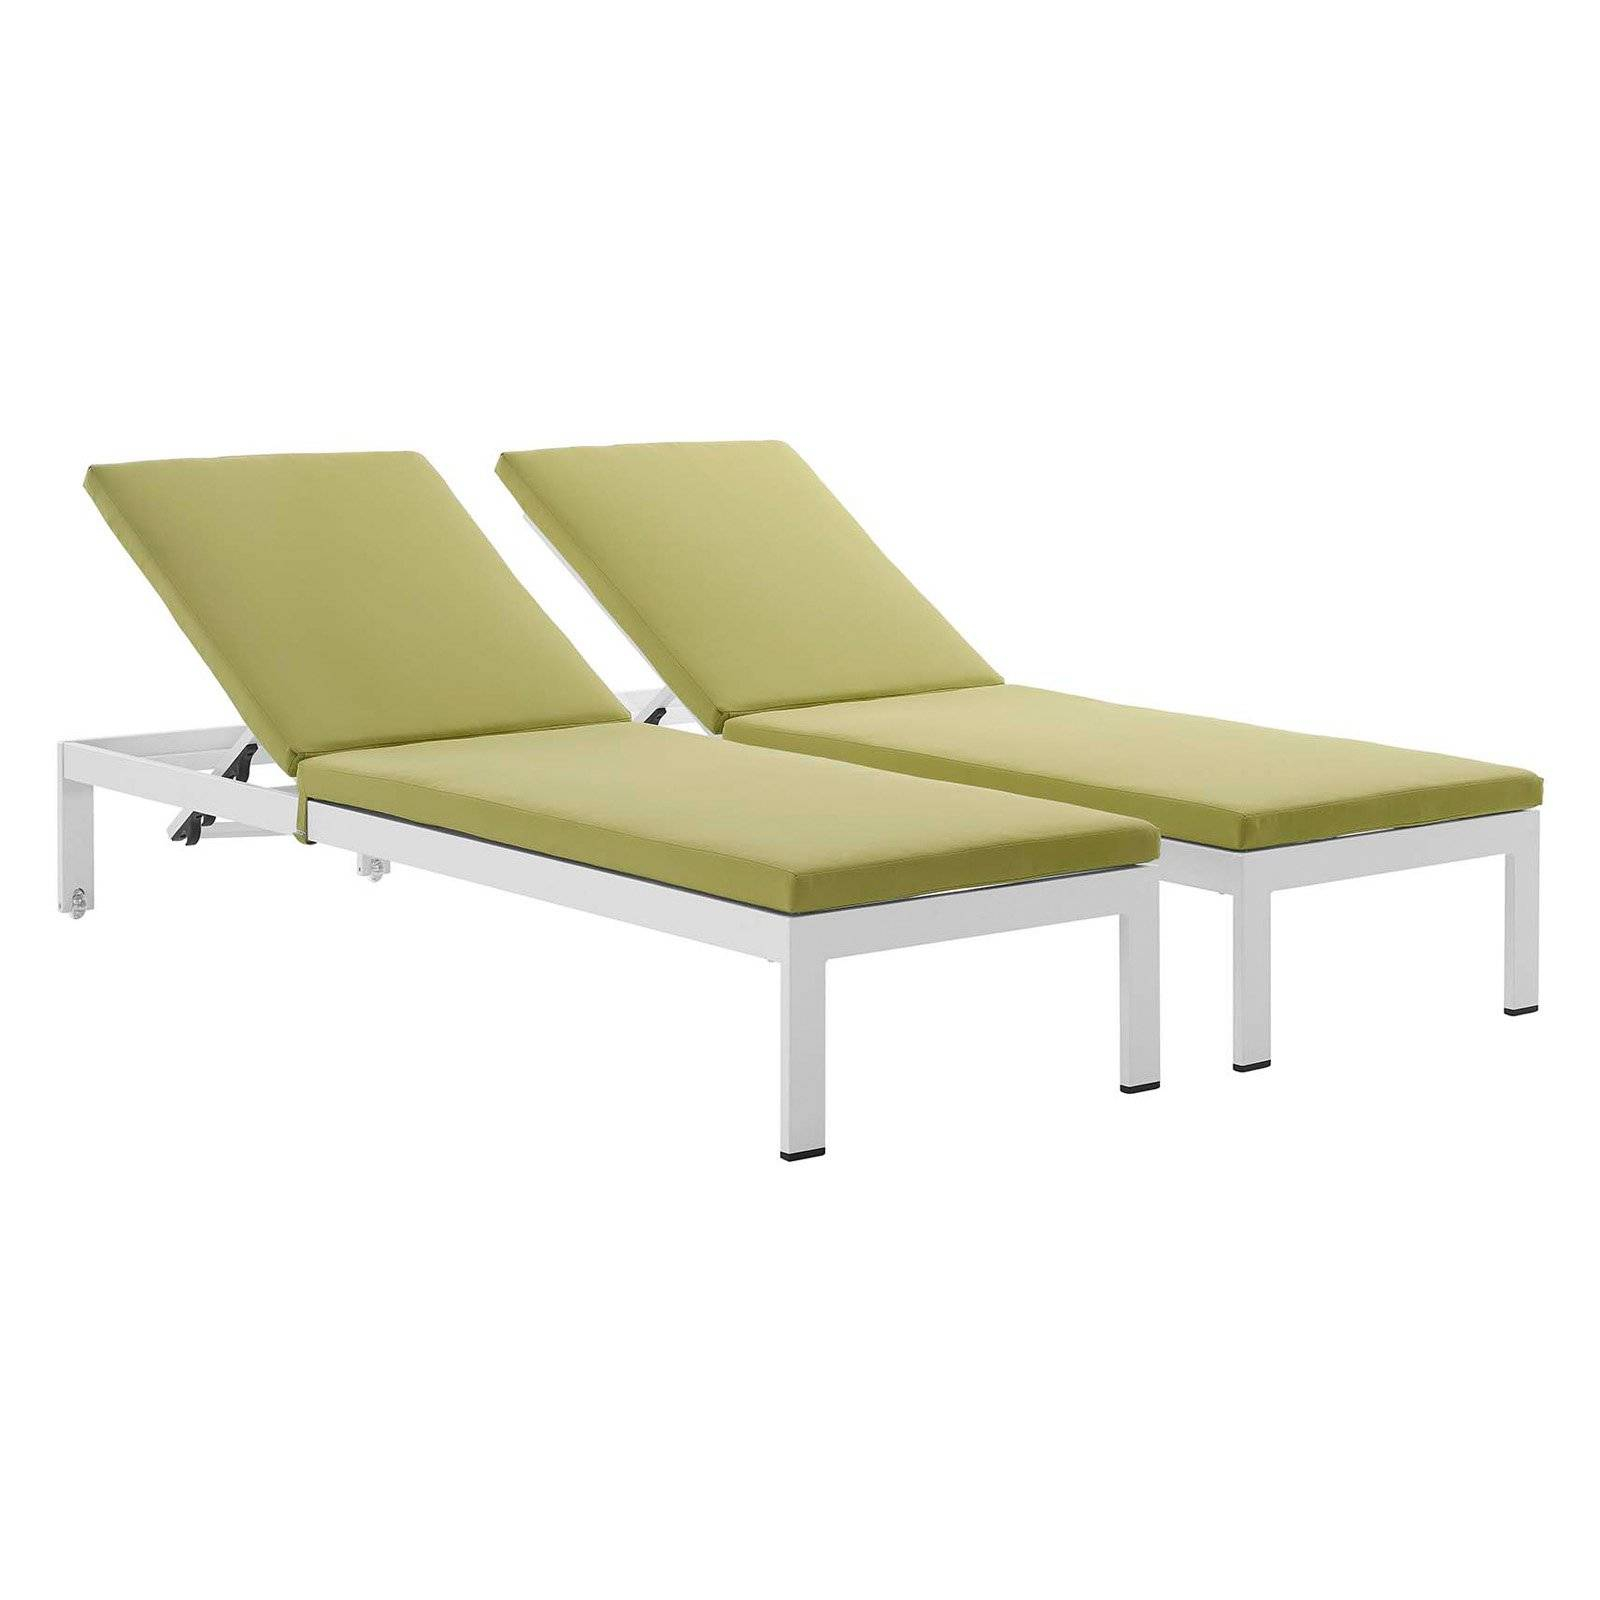 Patio Chaise Lounge Awesome Shore Aluminum Outdoor Chair pertaining to dimensions 1600 X 1600